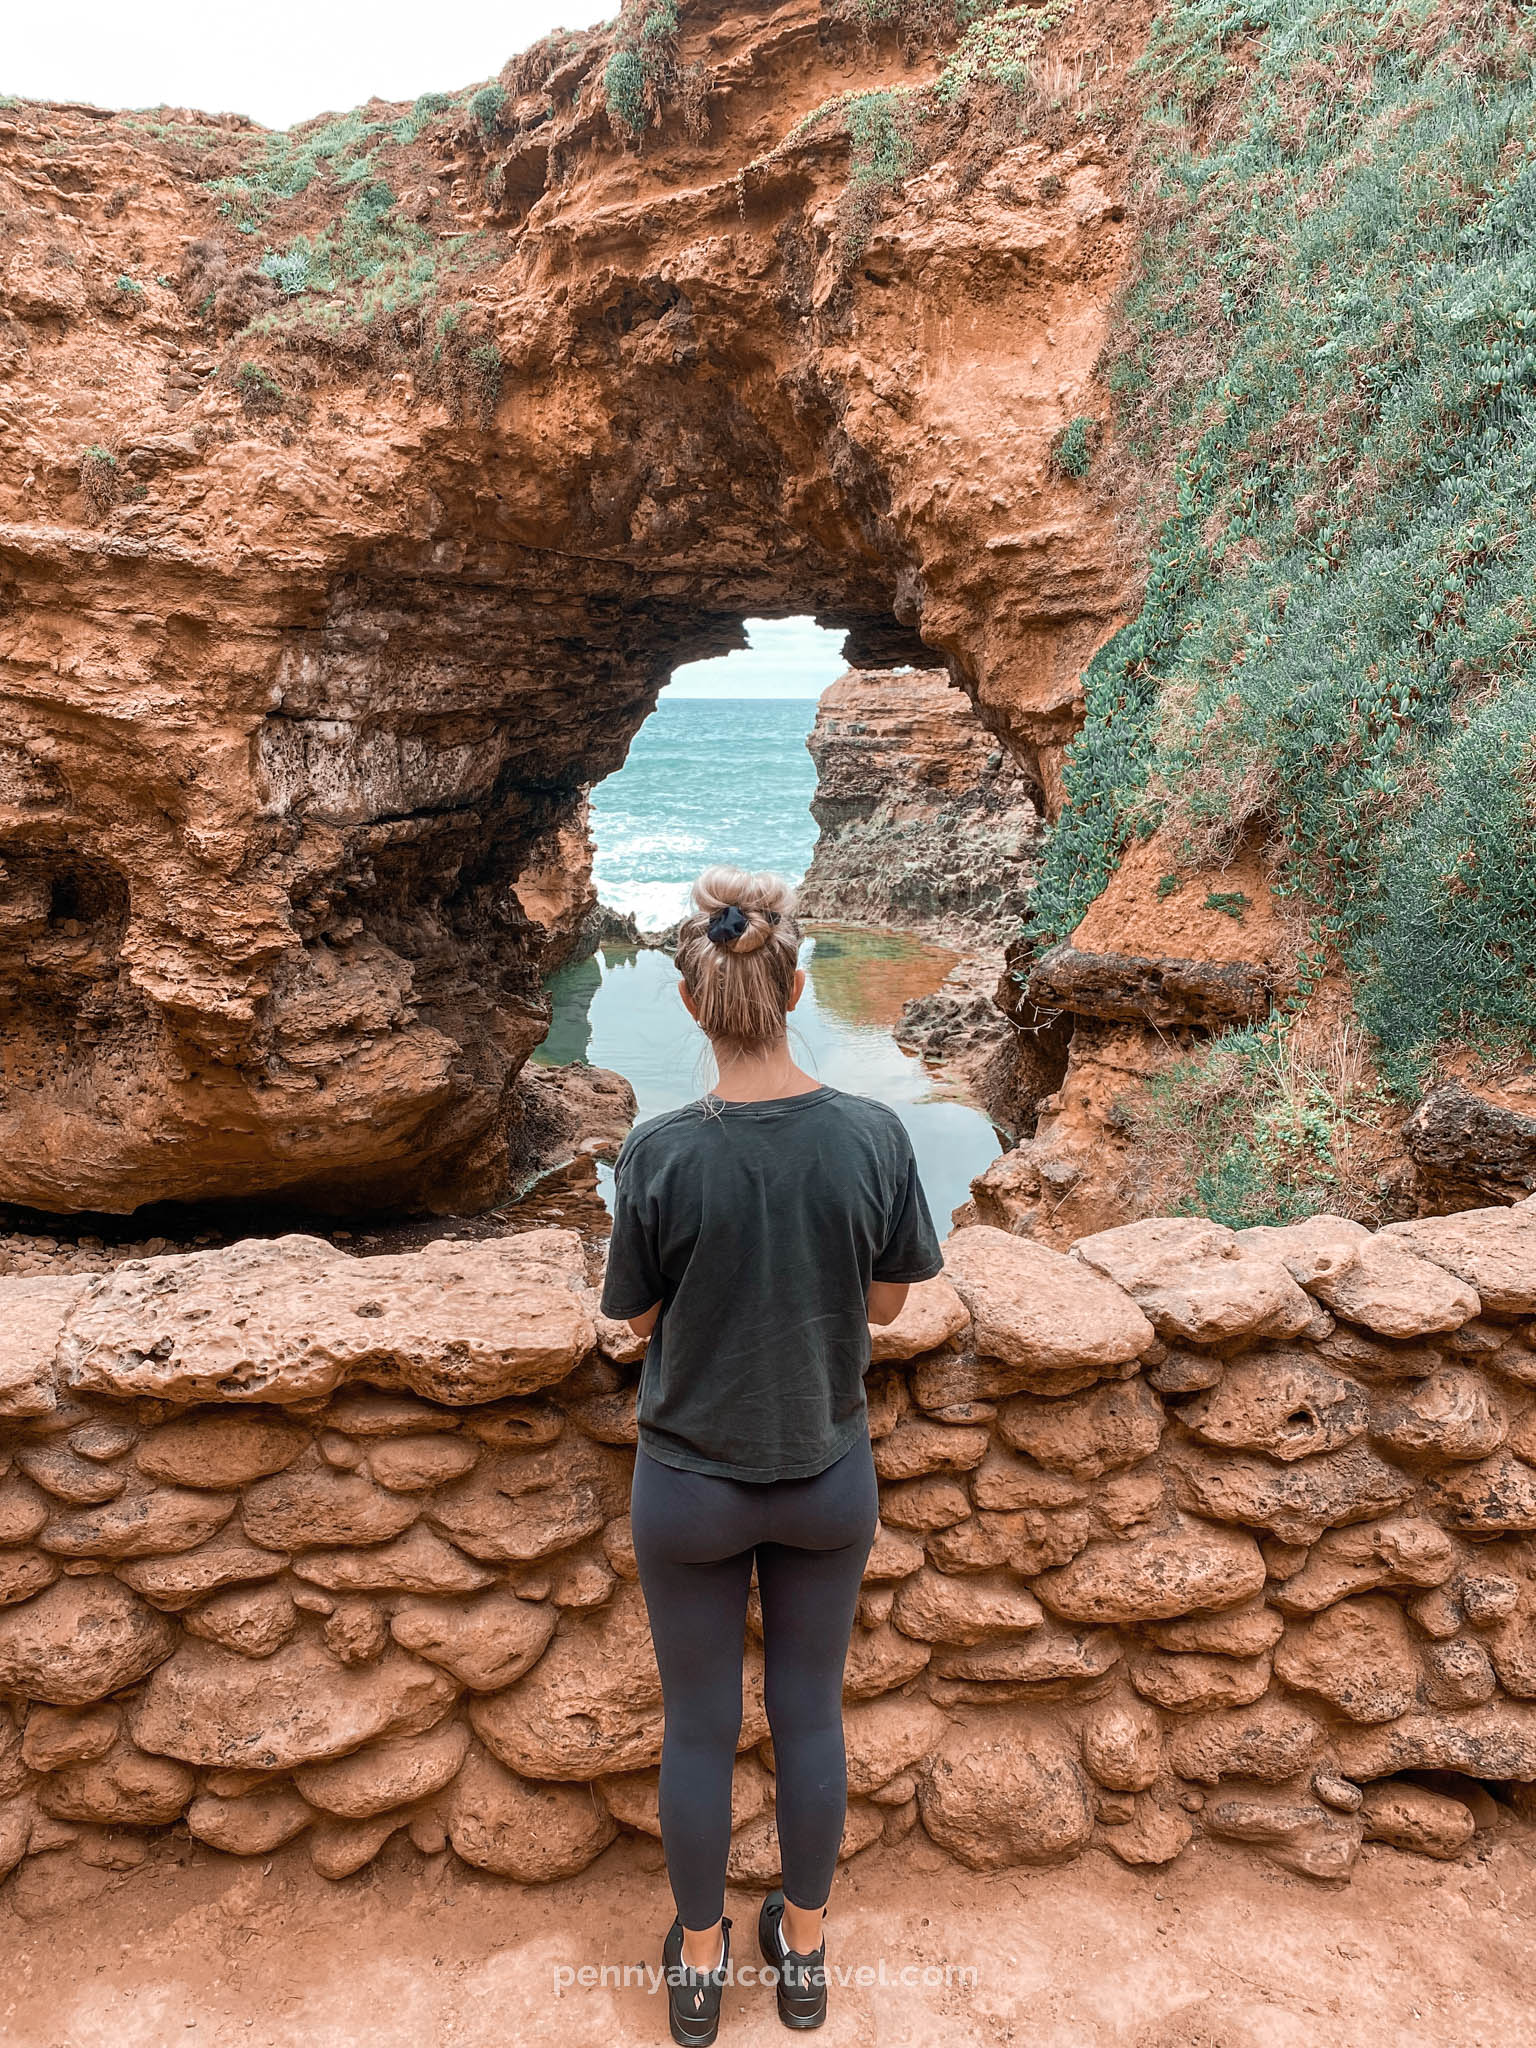 Things to do along the great ocean road > The Grotto